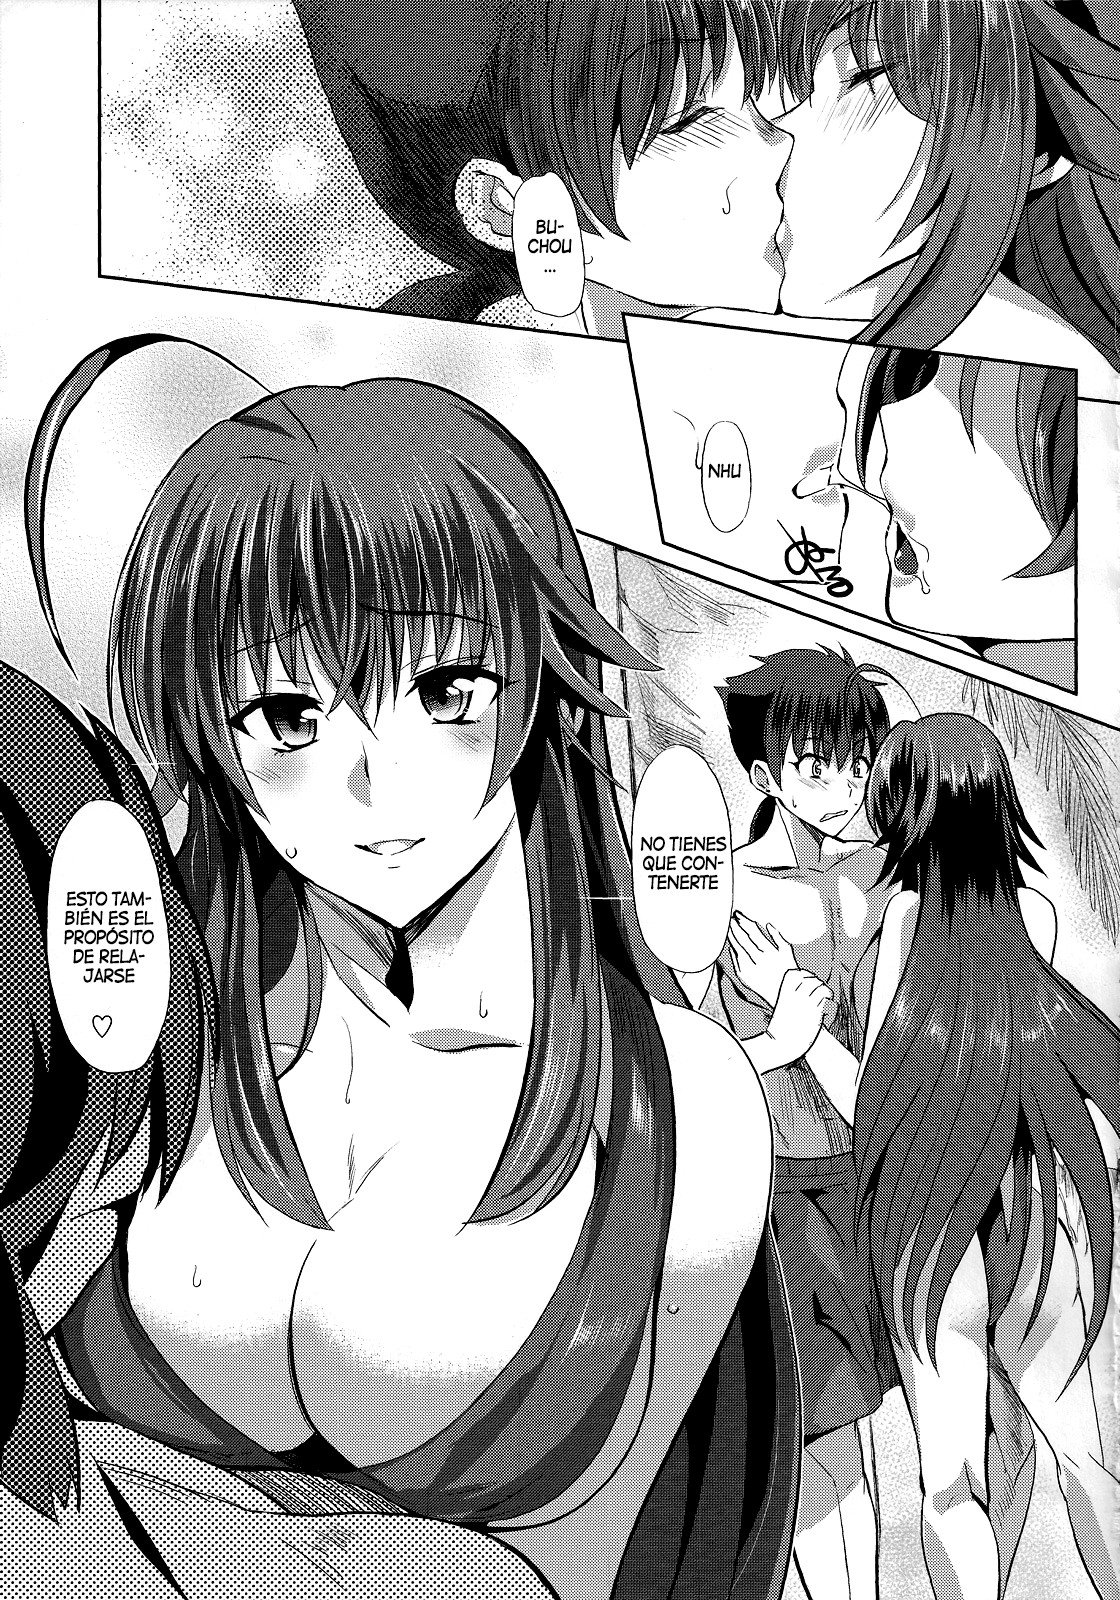 Rias to DxD (High School DxD) (C84) - 5